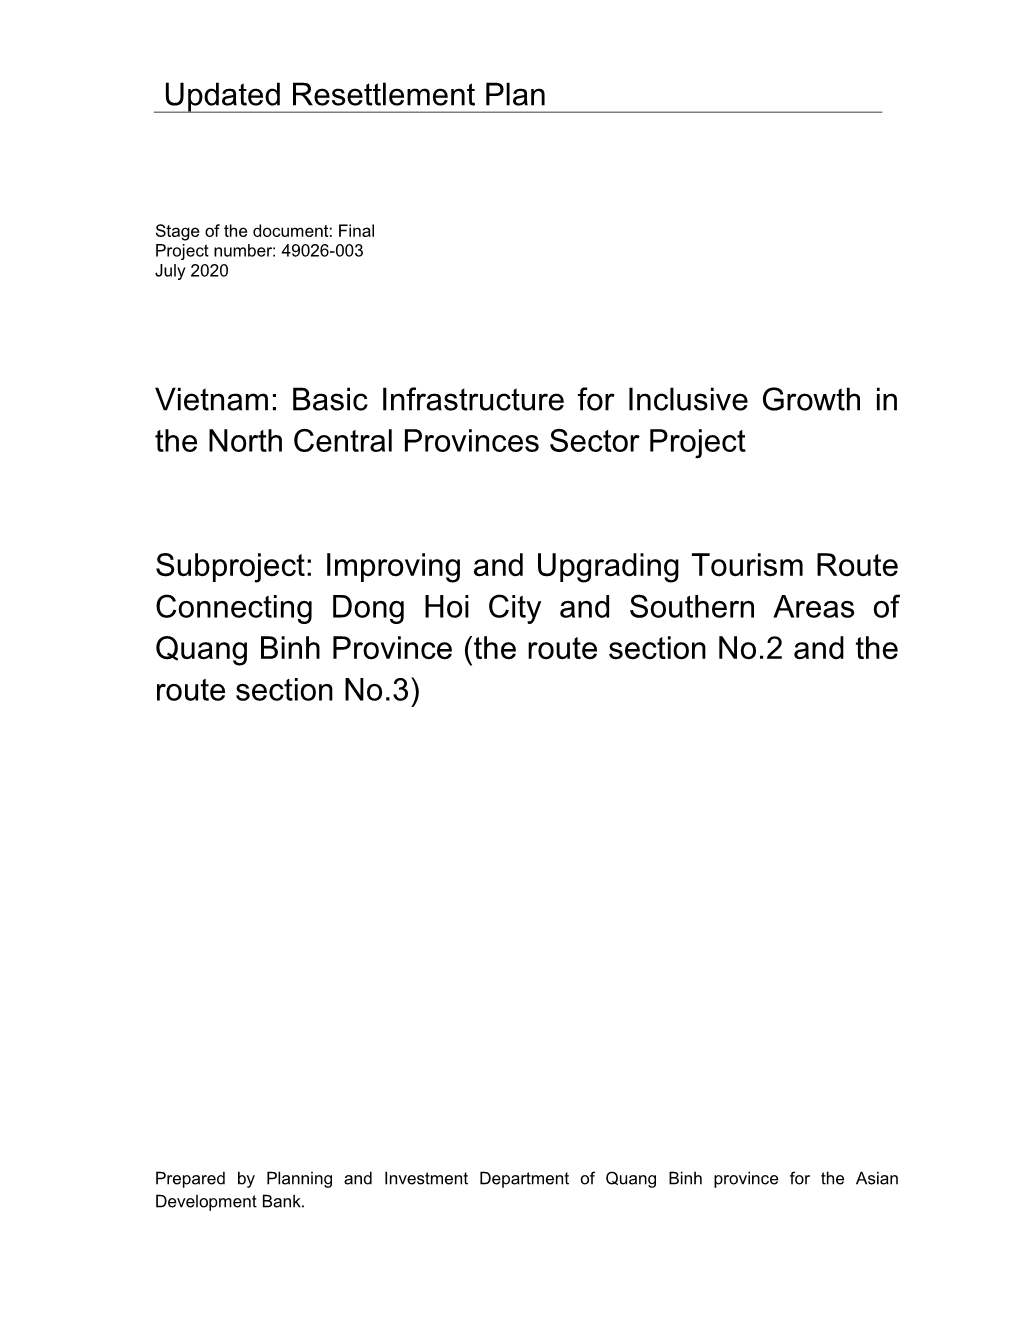 Updated Resettlement Plan Vietnam: Basic Infrastructure for Inclusive